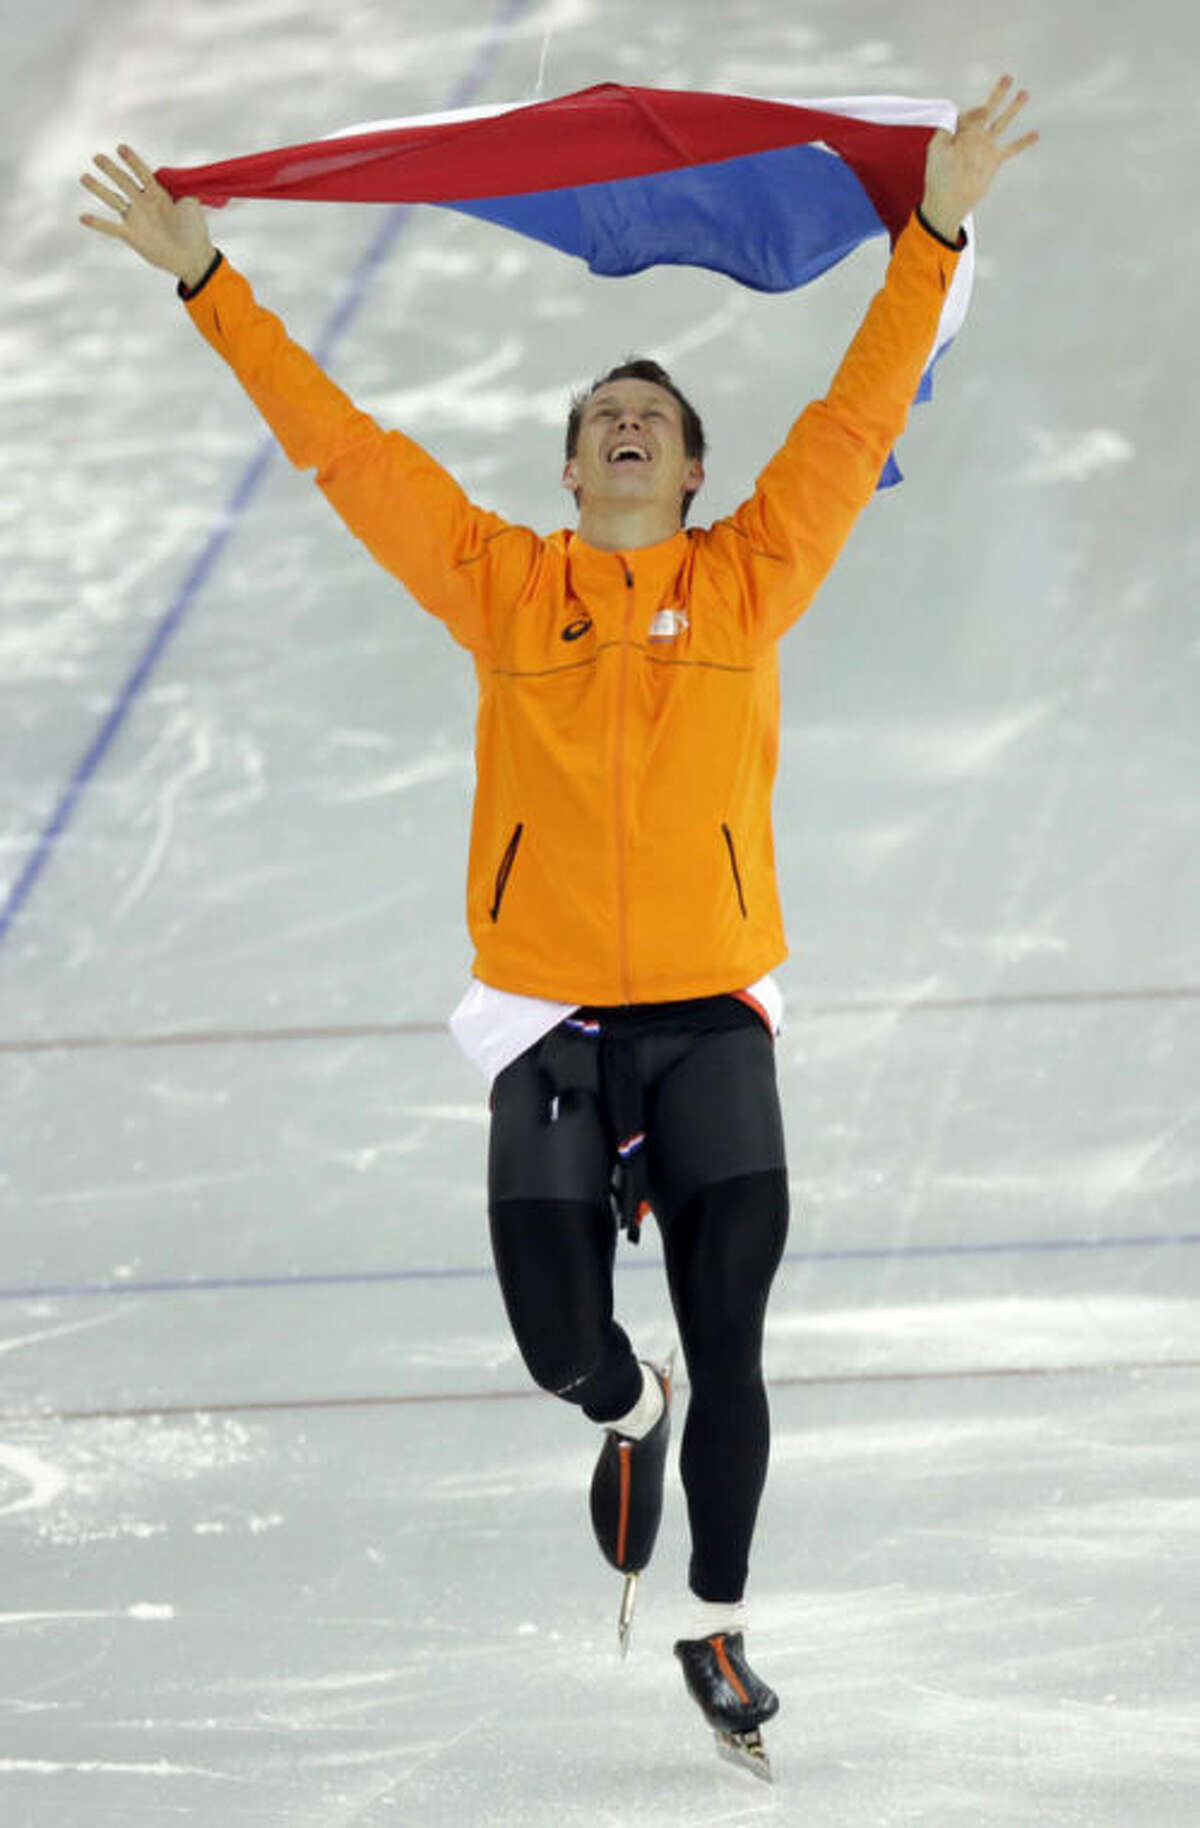 Stefan Groothuis of the Netherlands holds his national flag and celebrates after winning the gold in the men's 1,000-meter speedskating race at the Adler Arena Skating Center at the 2014 Winter Olympics in Sochi, Russia, Wednesday, Feb. 12, 2014. (AP Photo/David J. Phillip )